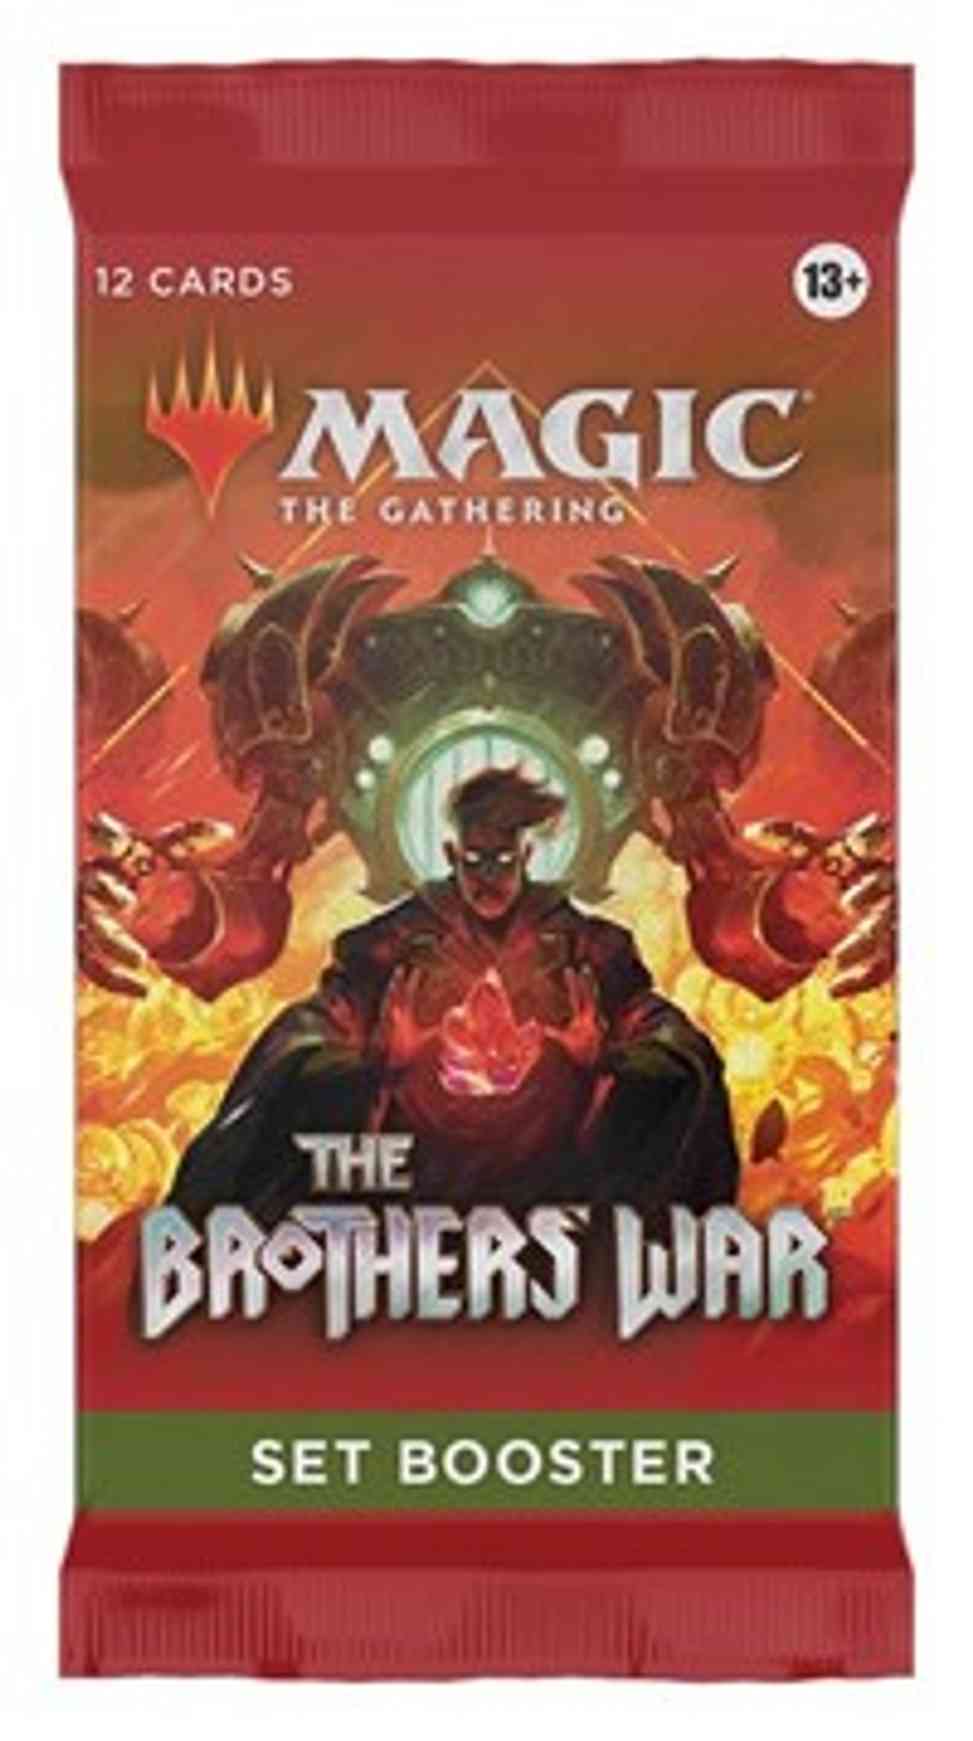 The Brothers' War - Set Booster Pack magic card front